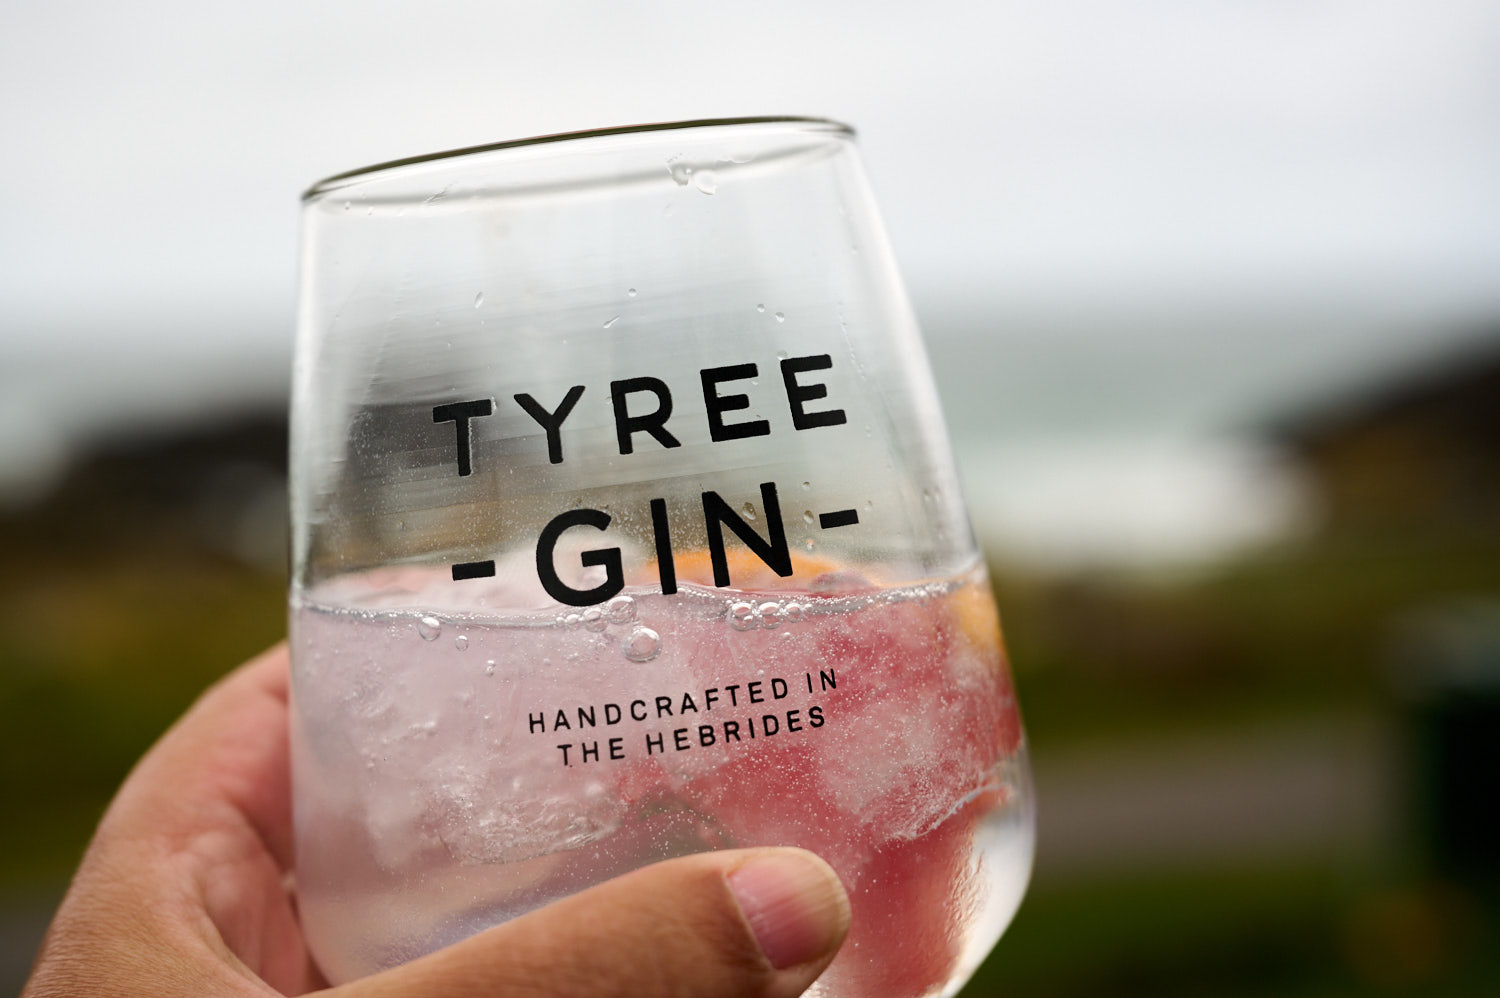 Learning how to make gin in Tiree.